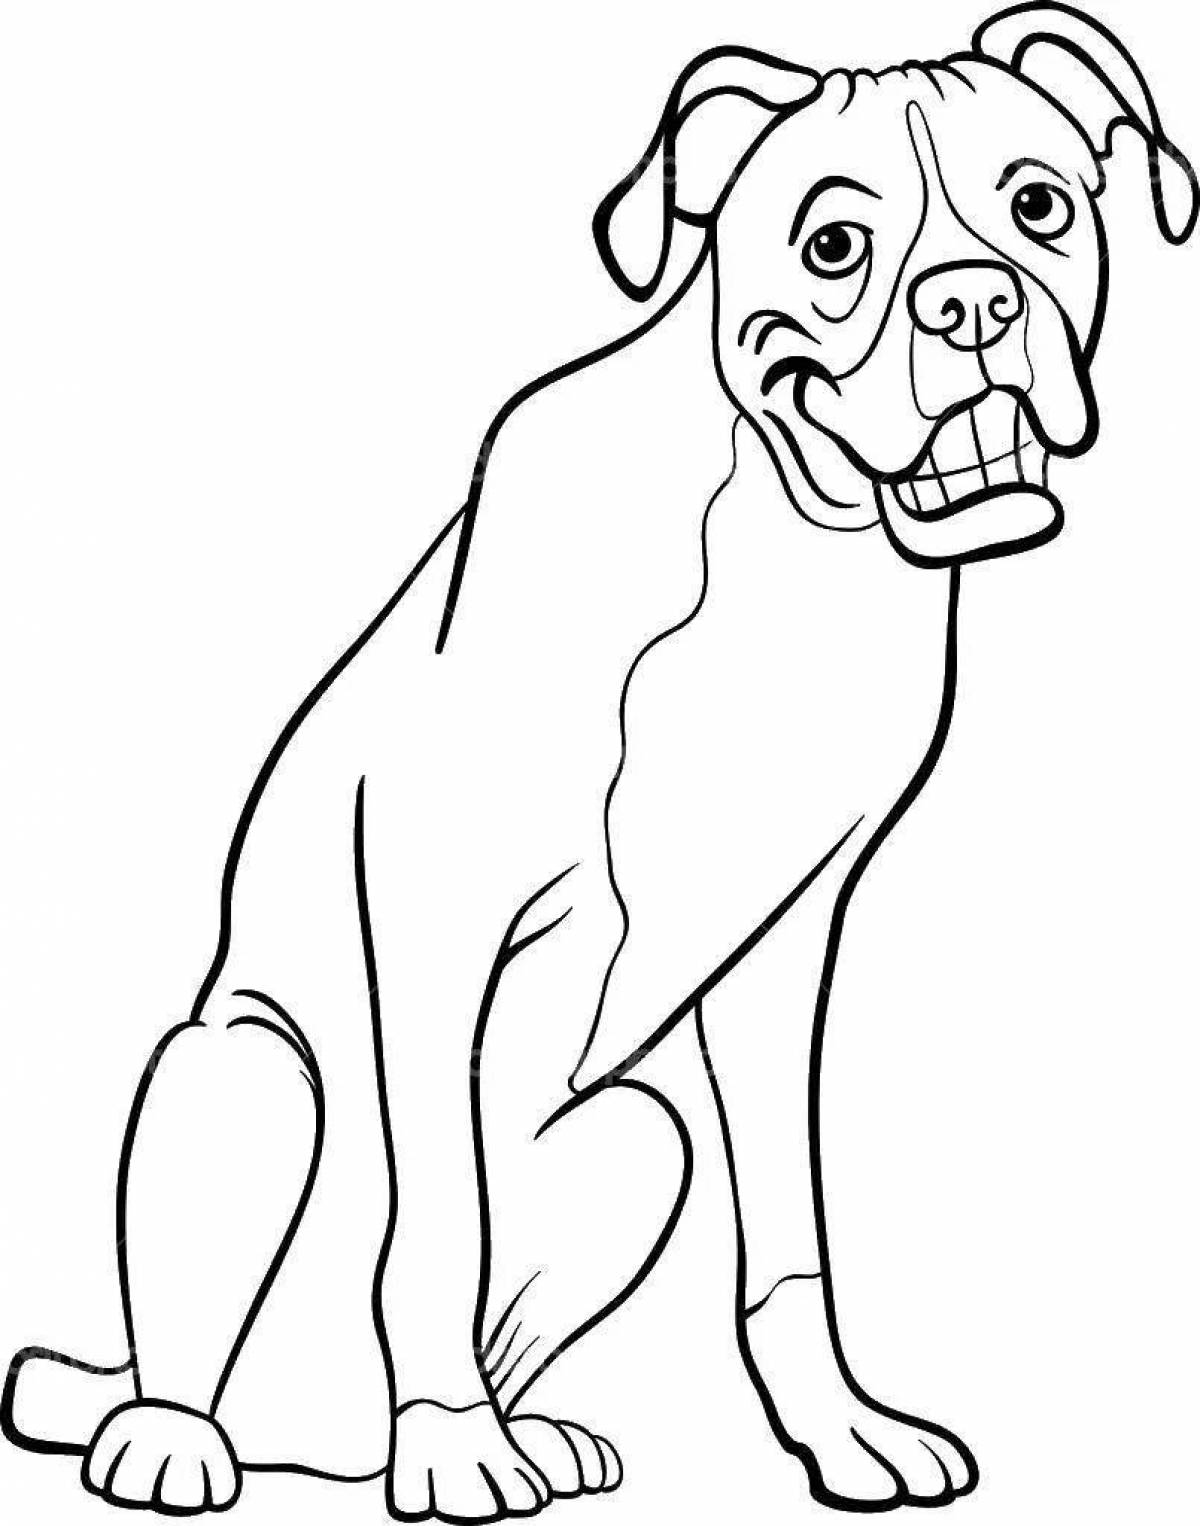 Coloring page graceful boxer